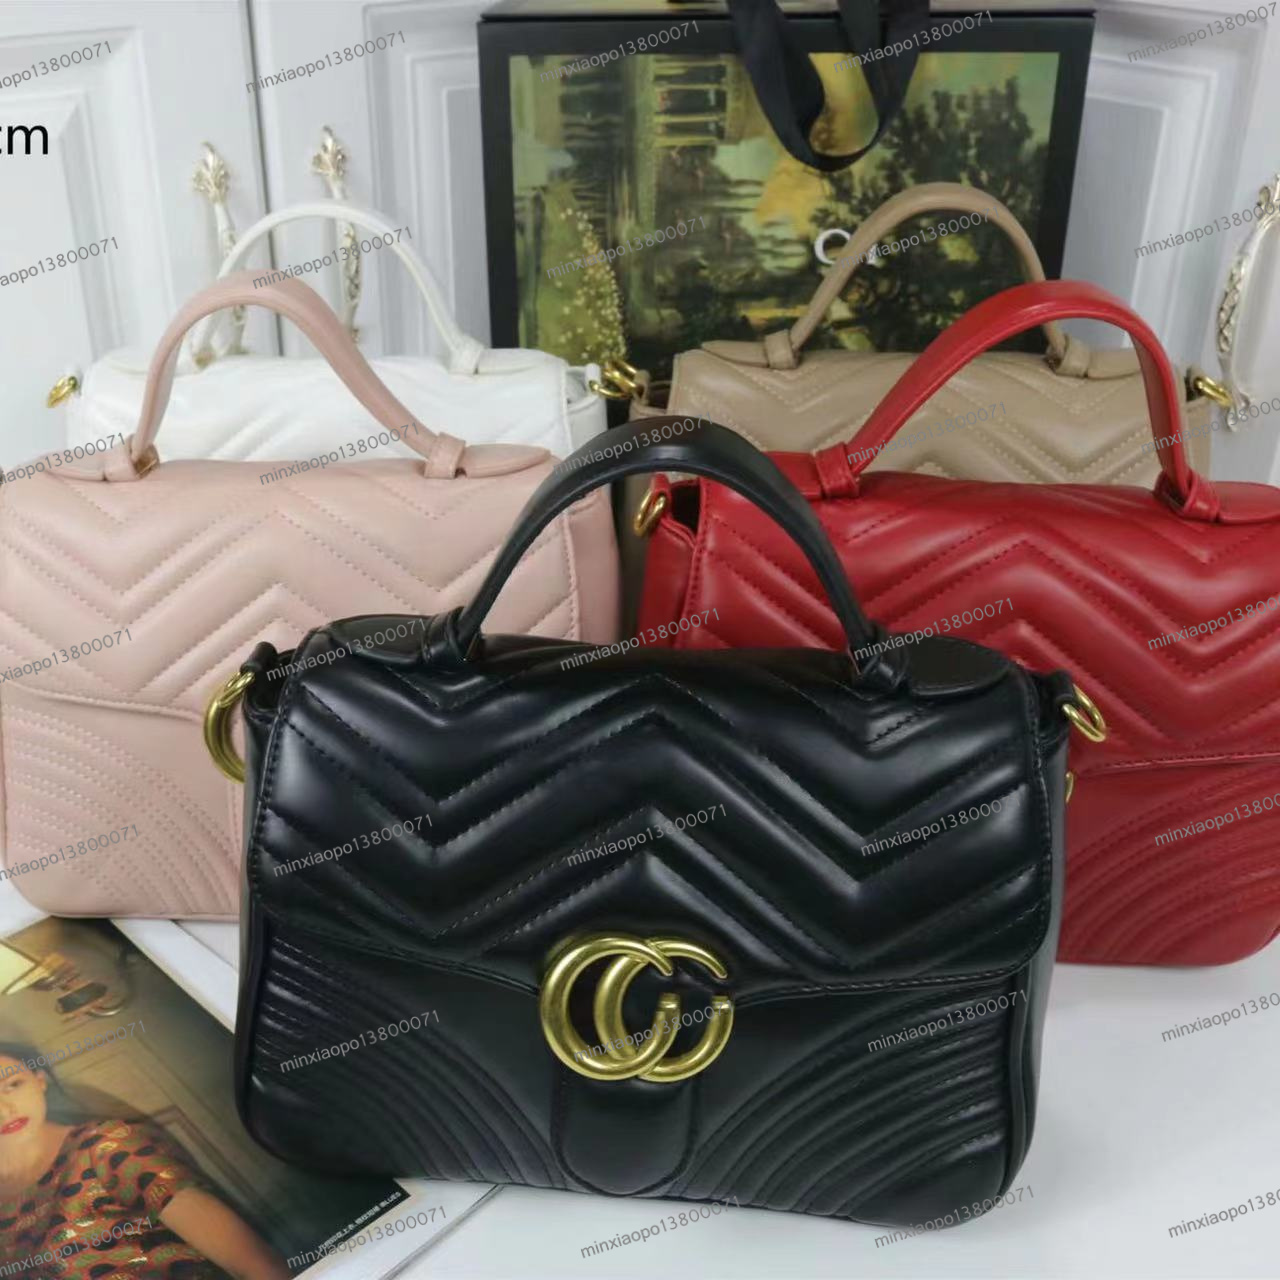 

New Style Marmont Shoulder Bags Women GGs Gold Chain Cross Body Bag PU Leather Handbags Purse Female Messenger louise Purse vutton Crossbody viuton Bag, Extra fee (are not sold separat)